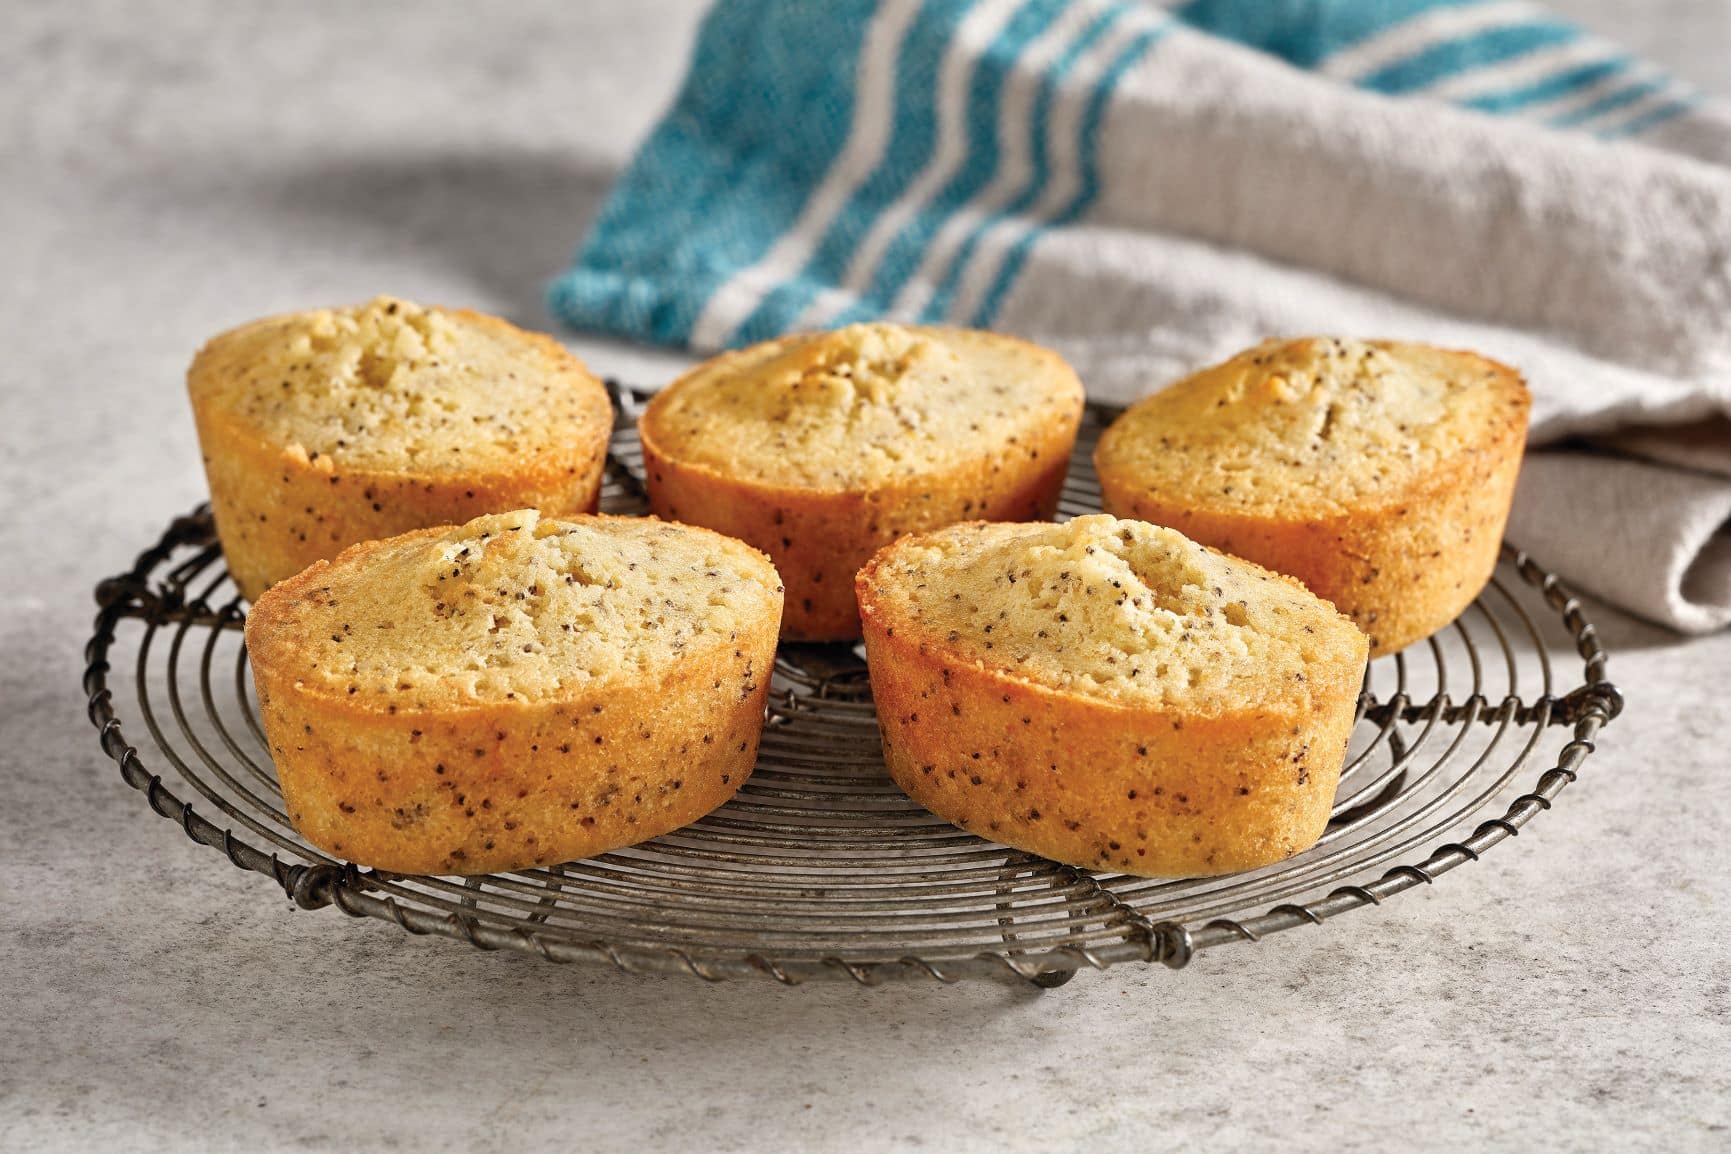 Orange and poppy seed friands